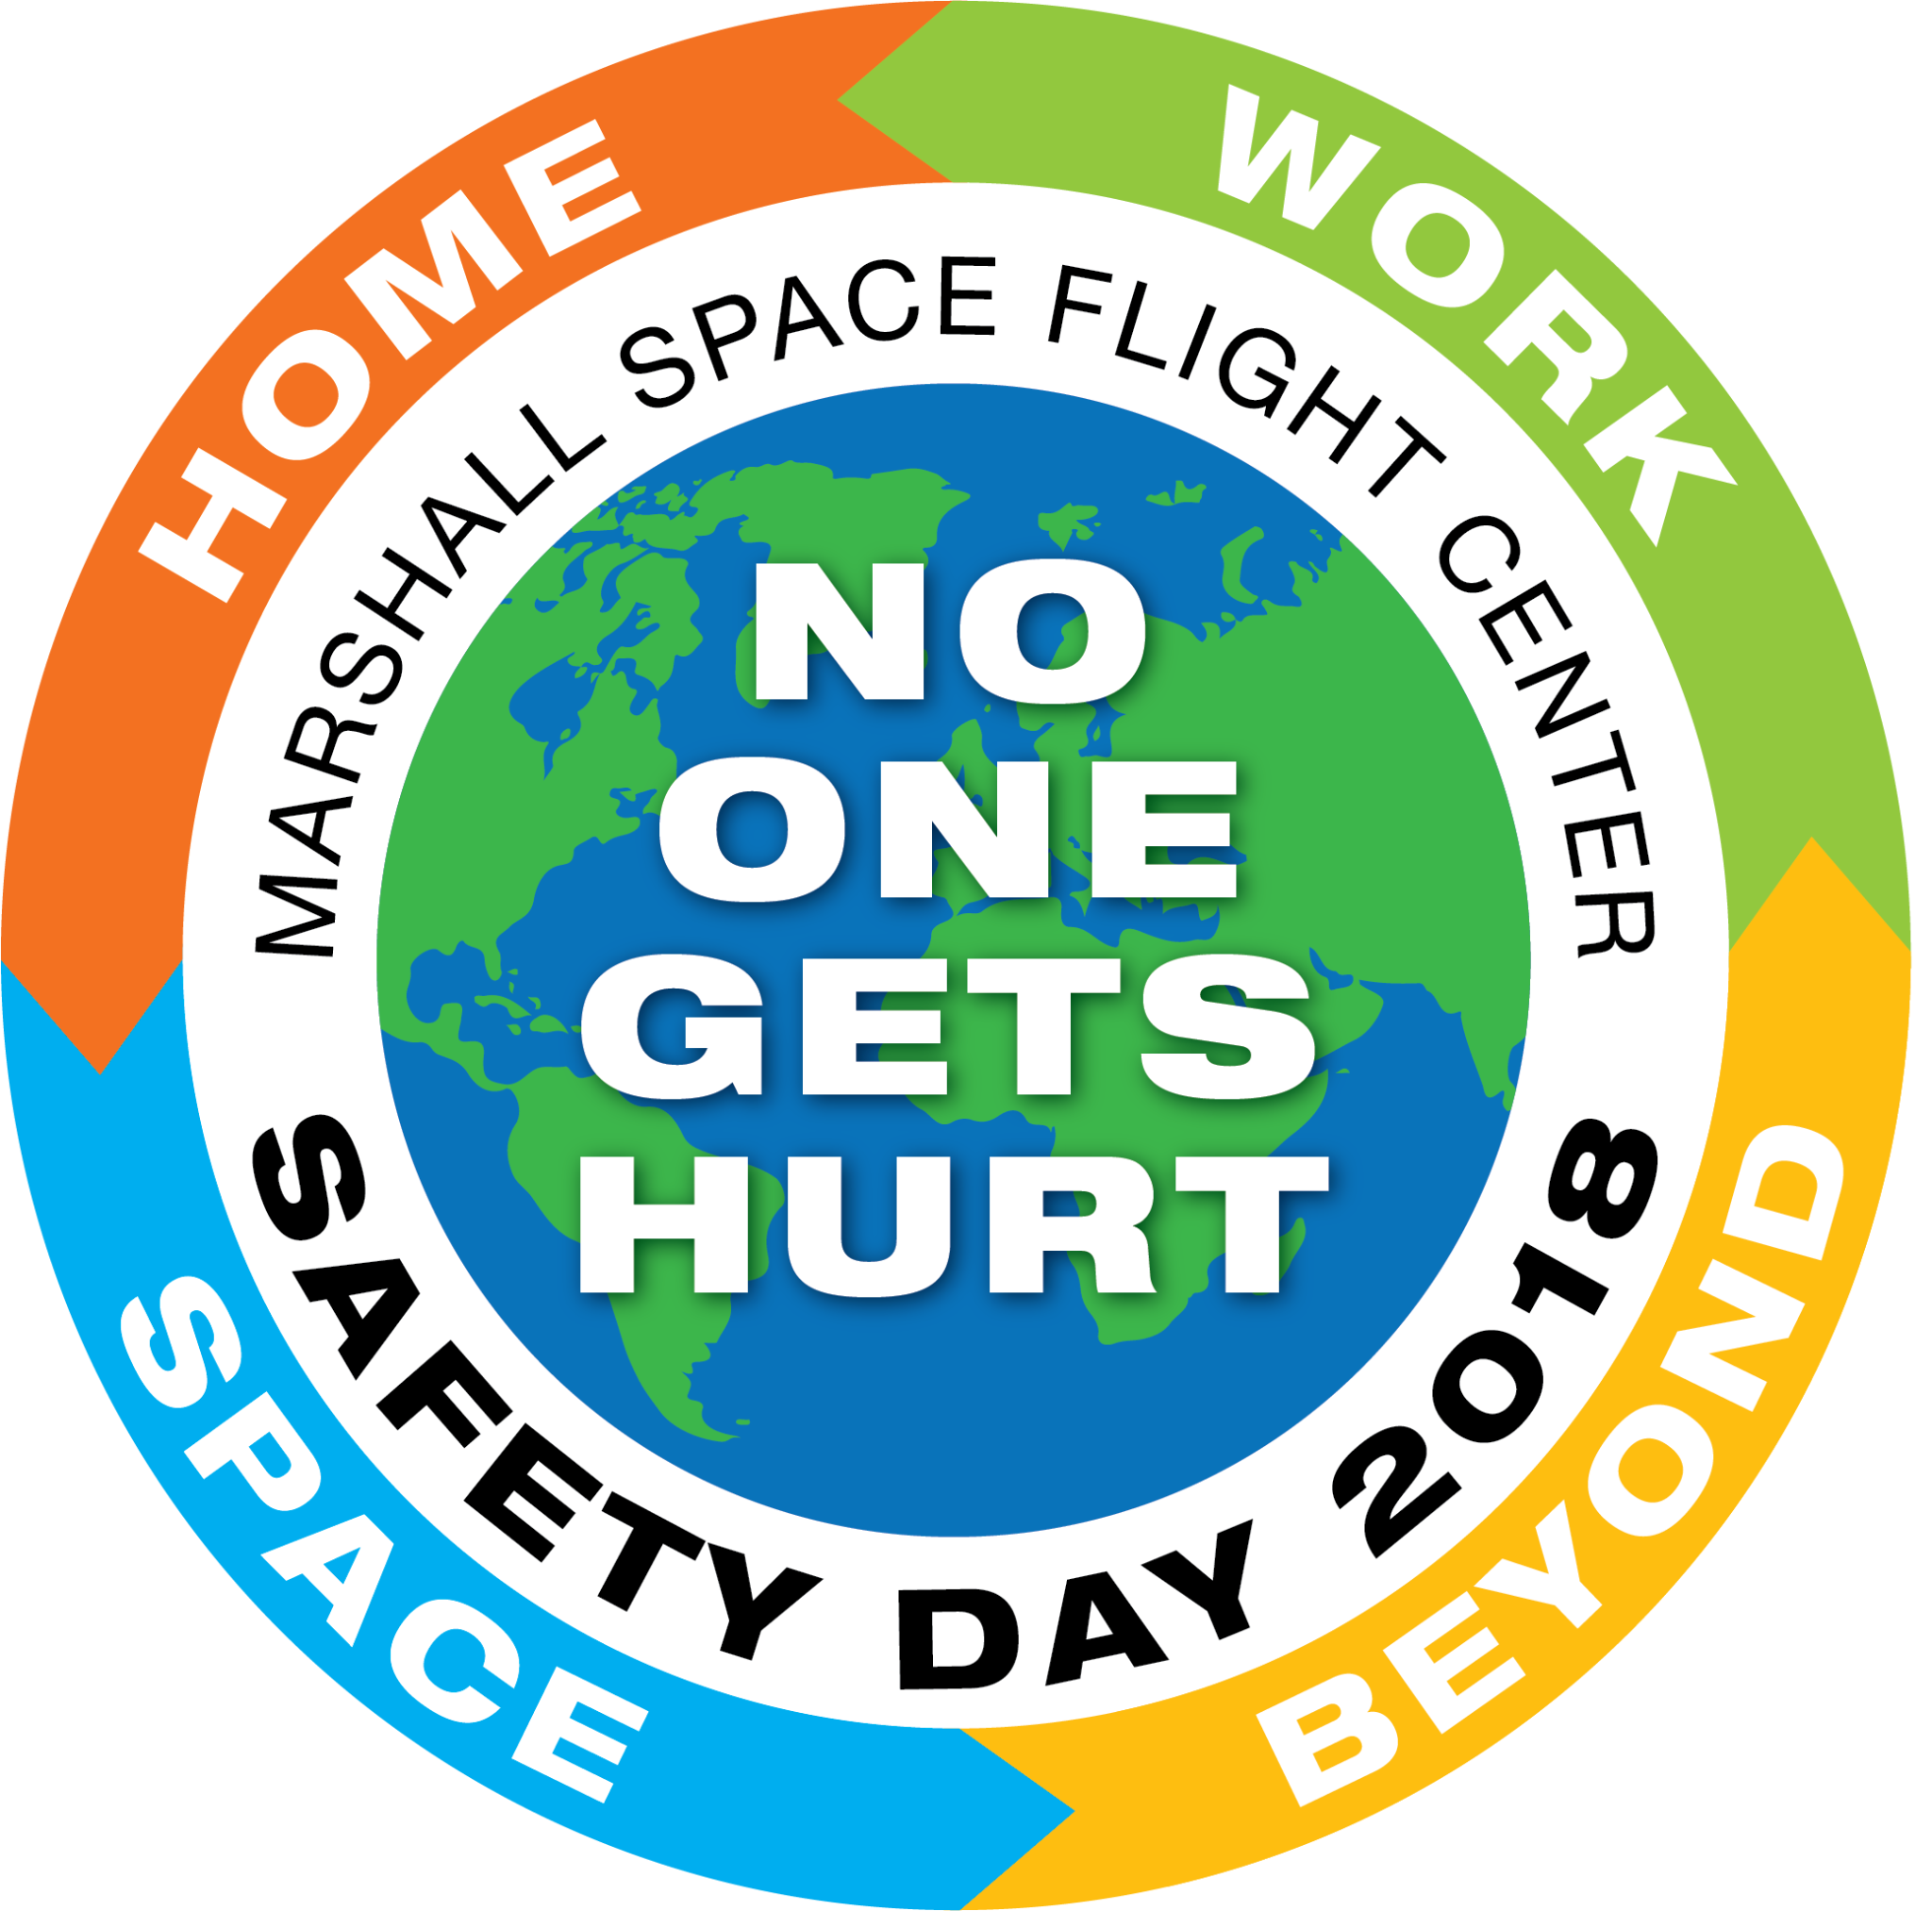 Marshall Space Flight Center Safety Day 2018 graphic.